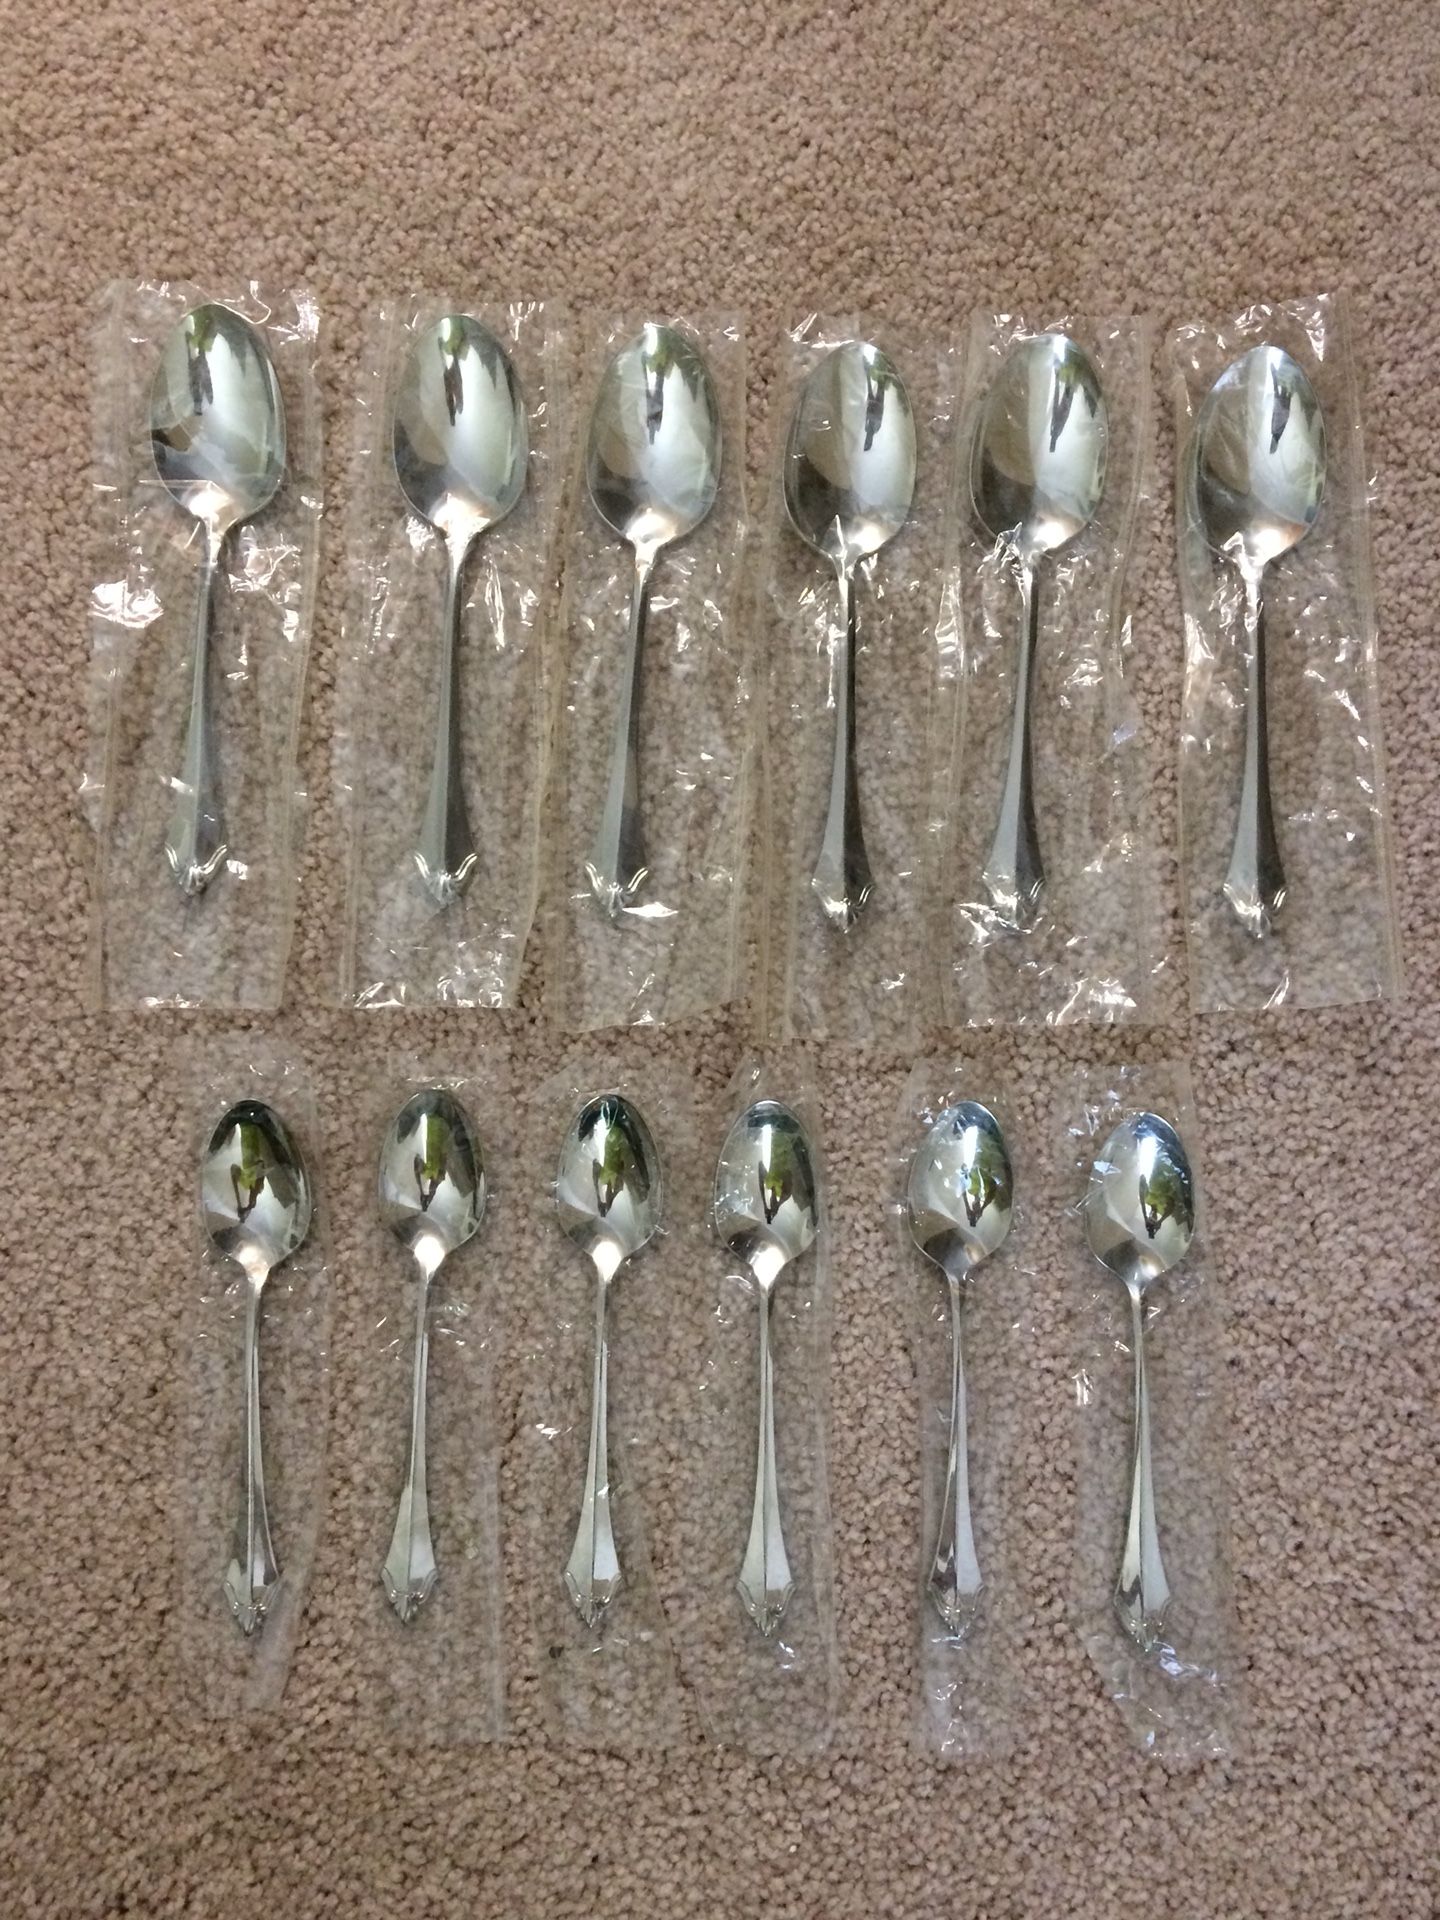 Six Tea Spoons and Serving Spoons in Belcourt (Silverplate) by Oneida